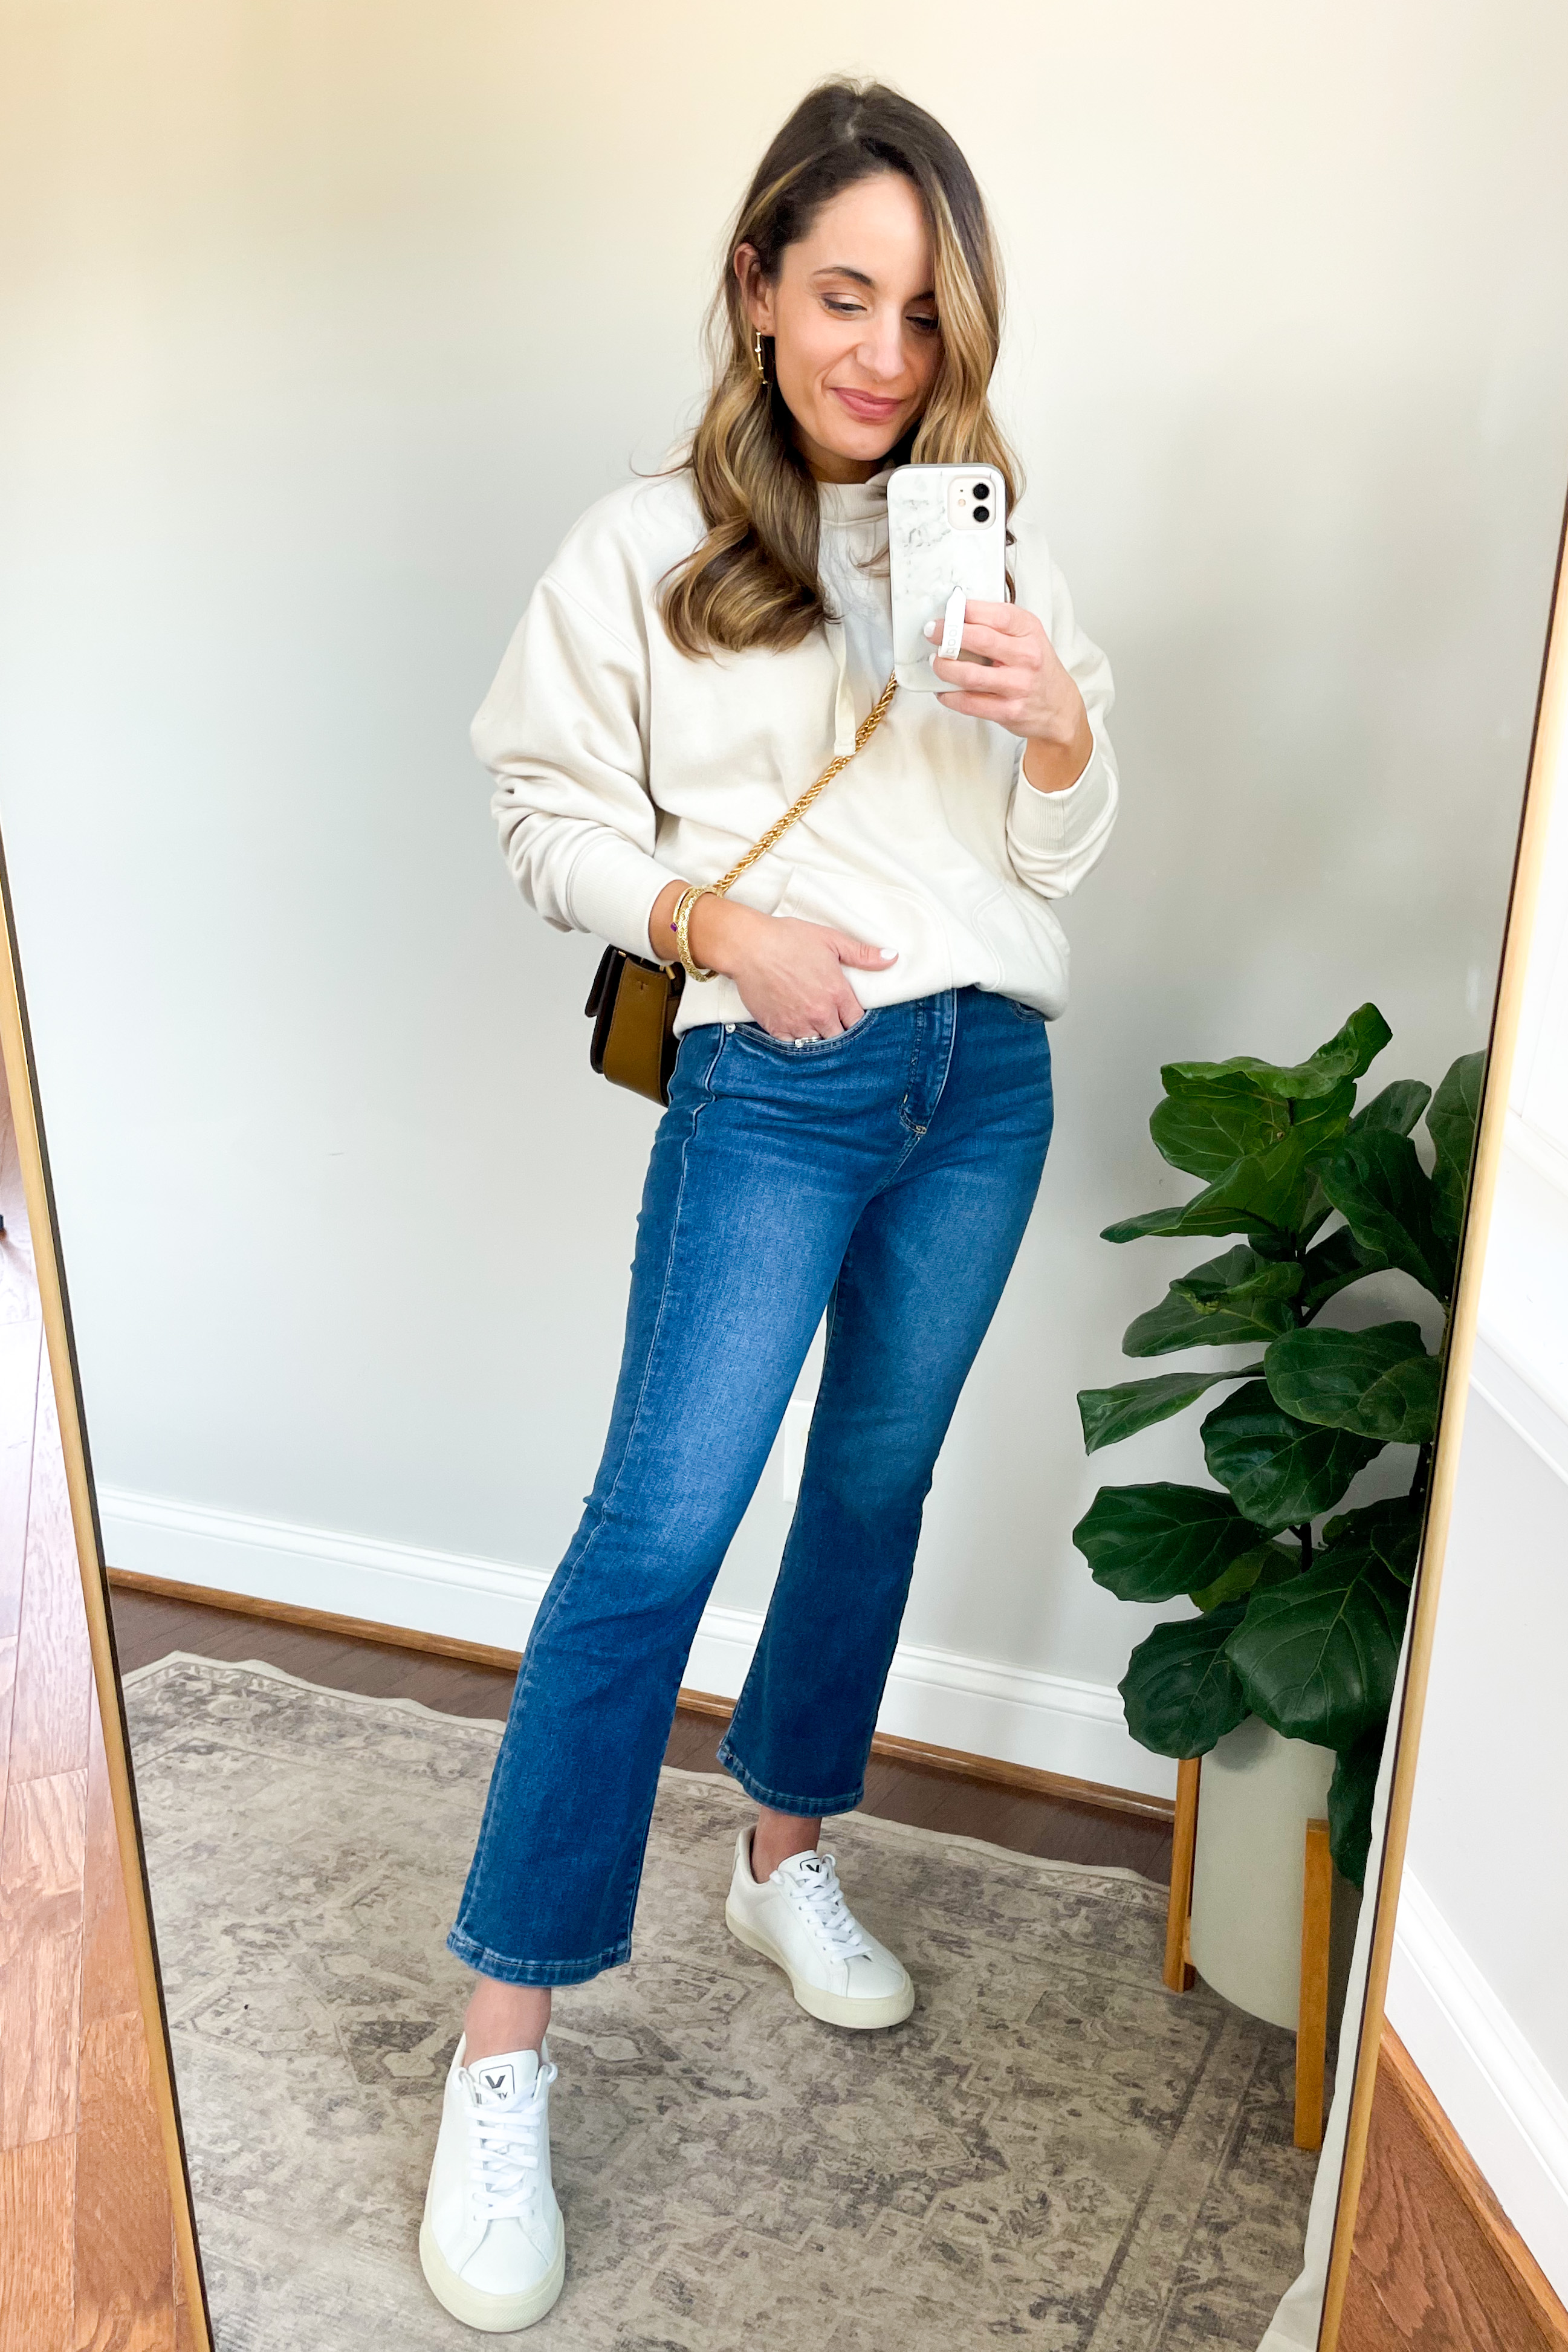 What Top To Pair With Cropped Flared Pants? – solowomen